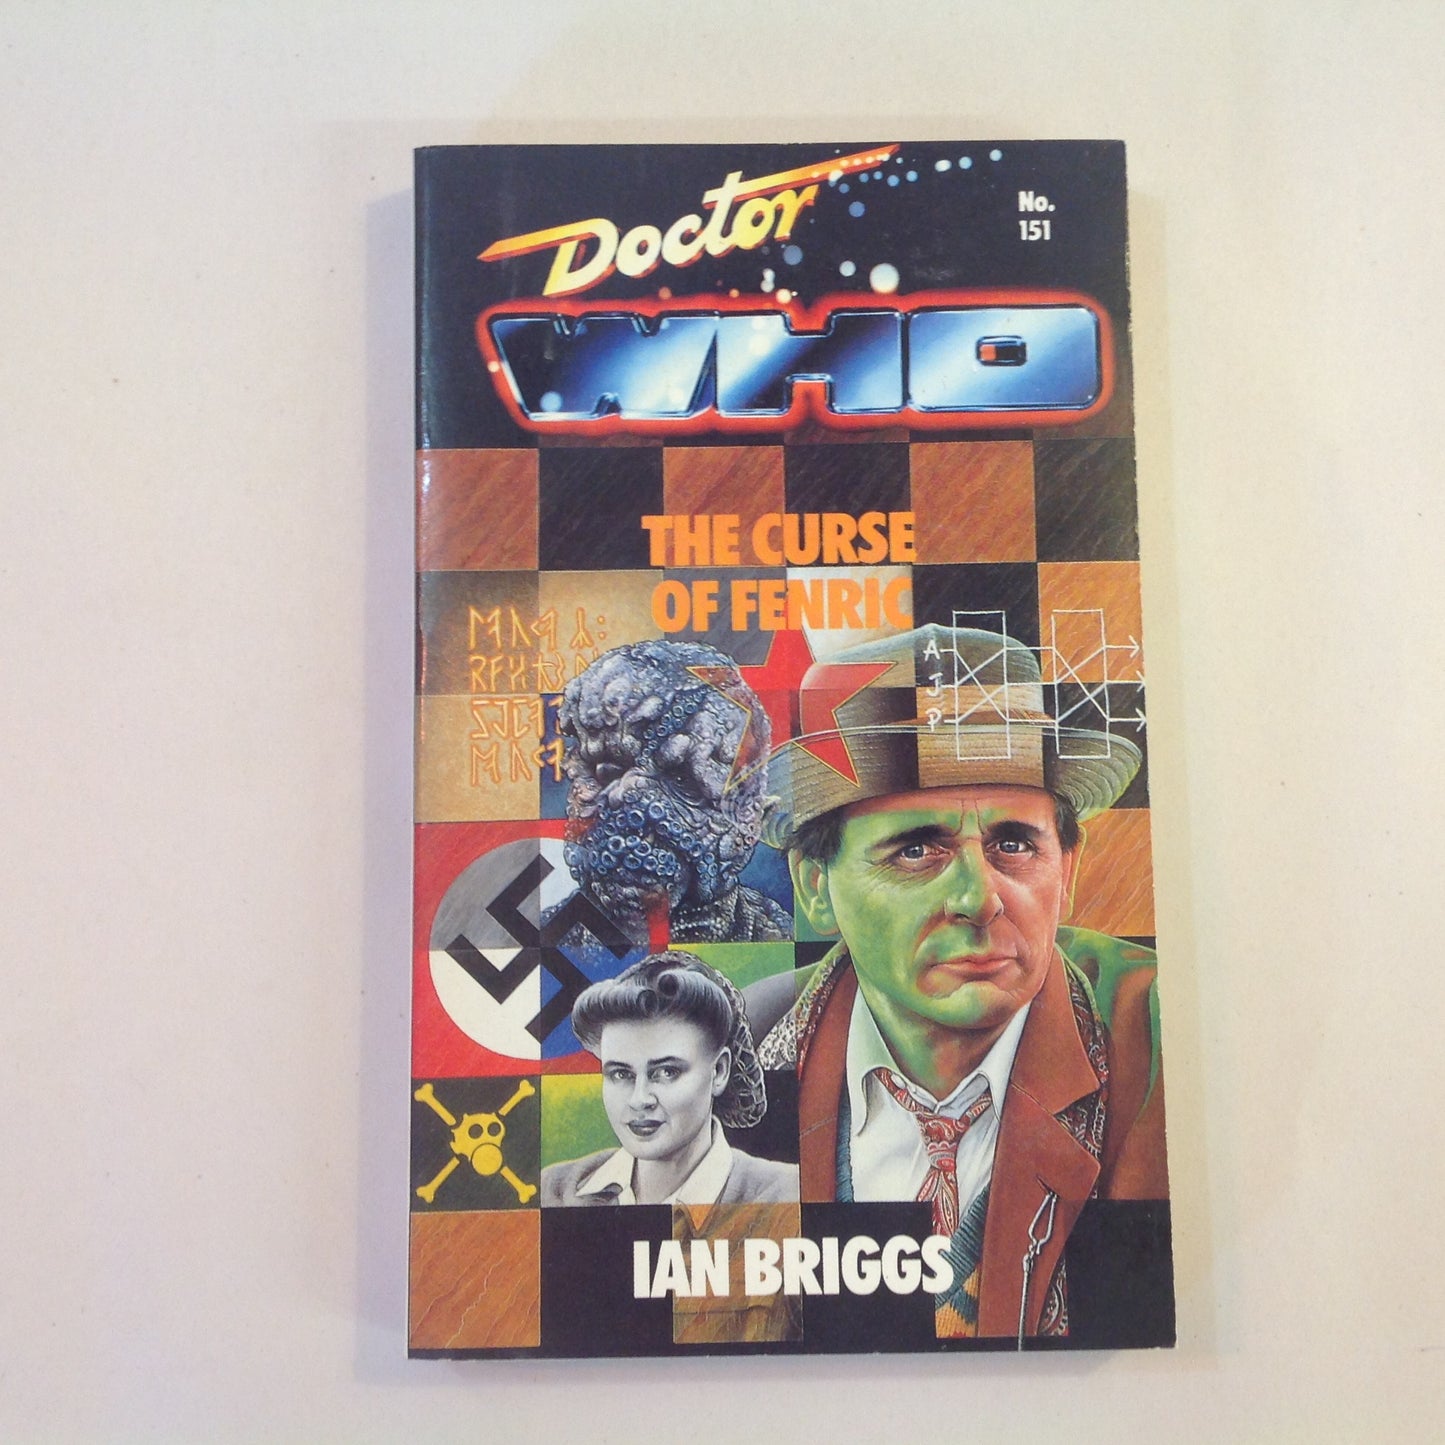 Vintage 1990 Mass Market Paperback Doctor Who: The Curse of Fenric Ian Briggs